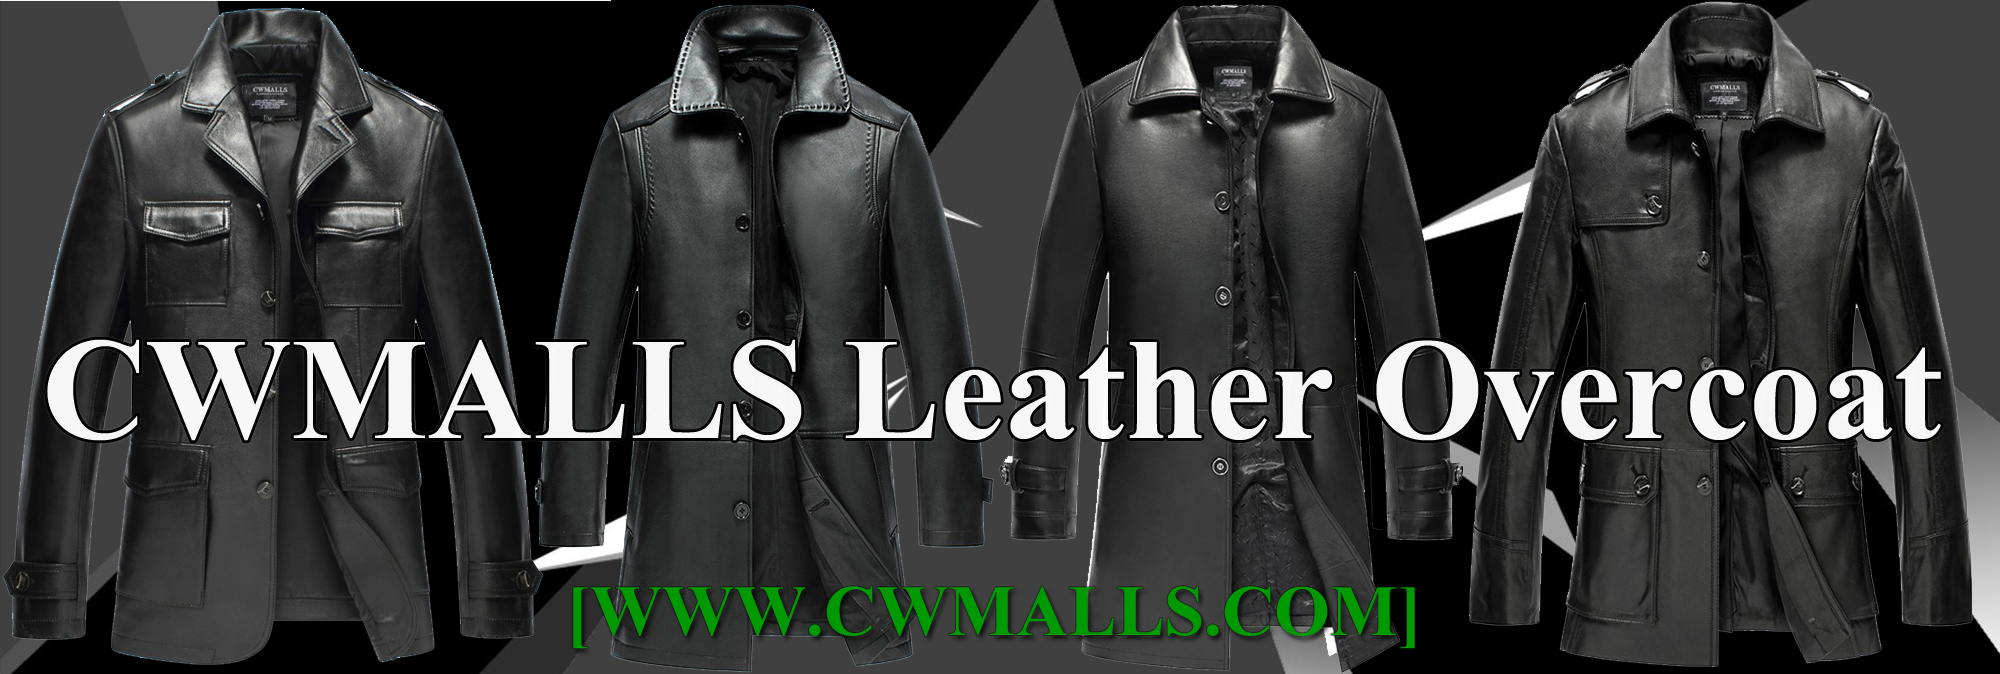 CWMALLS Leather Overcoat products